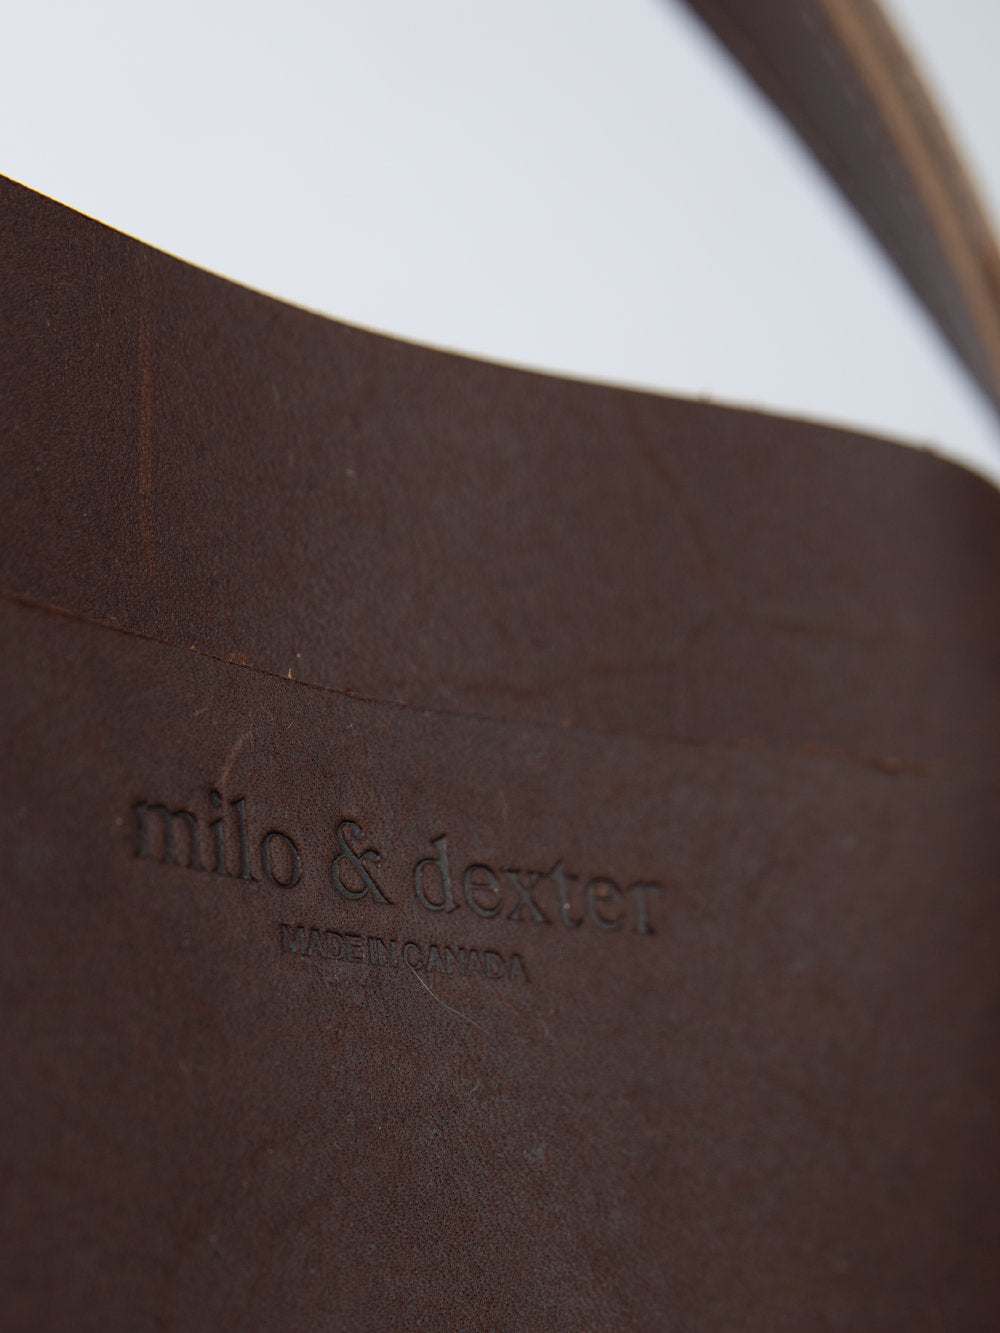 Milo & Dexter - SS24 - Classic Utility Leather Bag in Brown  - close-up 5